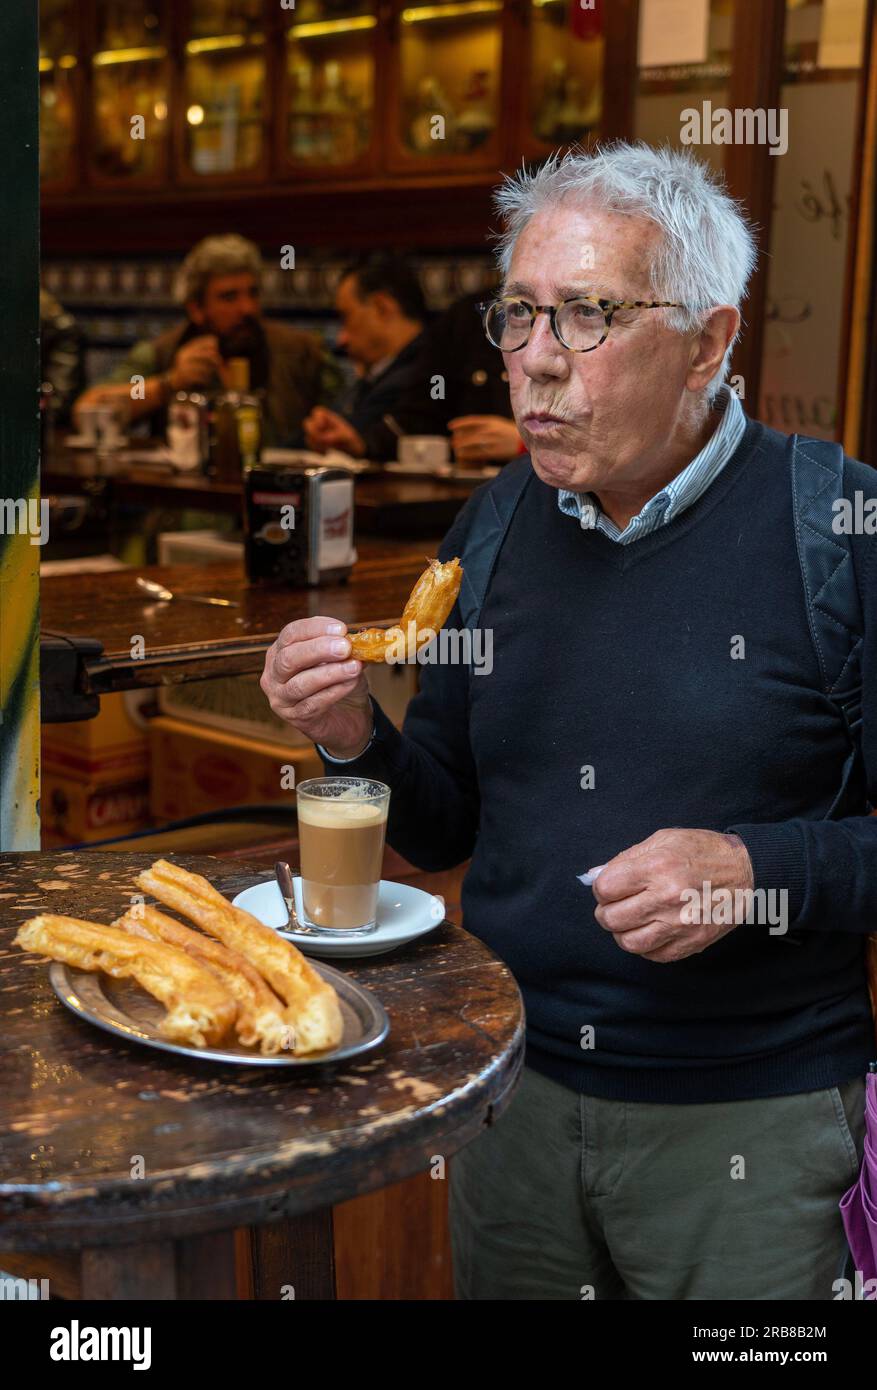 Cafe bar Bar El Comercio,Sevilla where people come and eat churros,pastries that will be dipped into hot chocolate sauce and enjoyed with coffee with Stock Photo